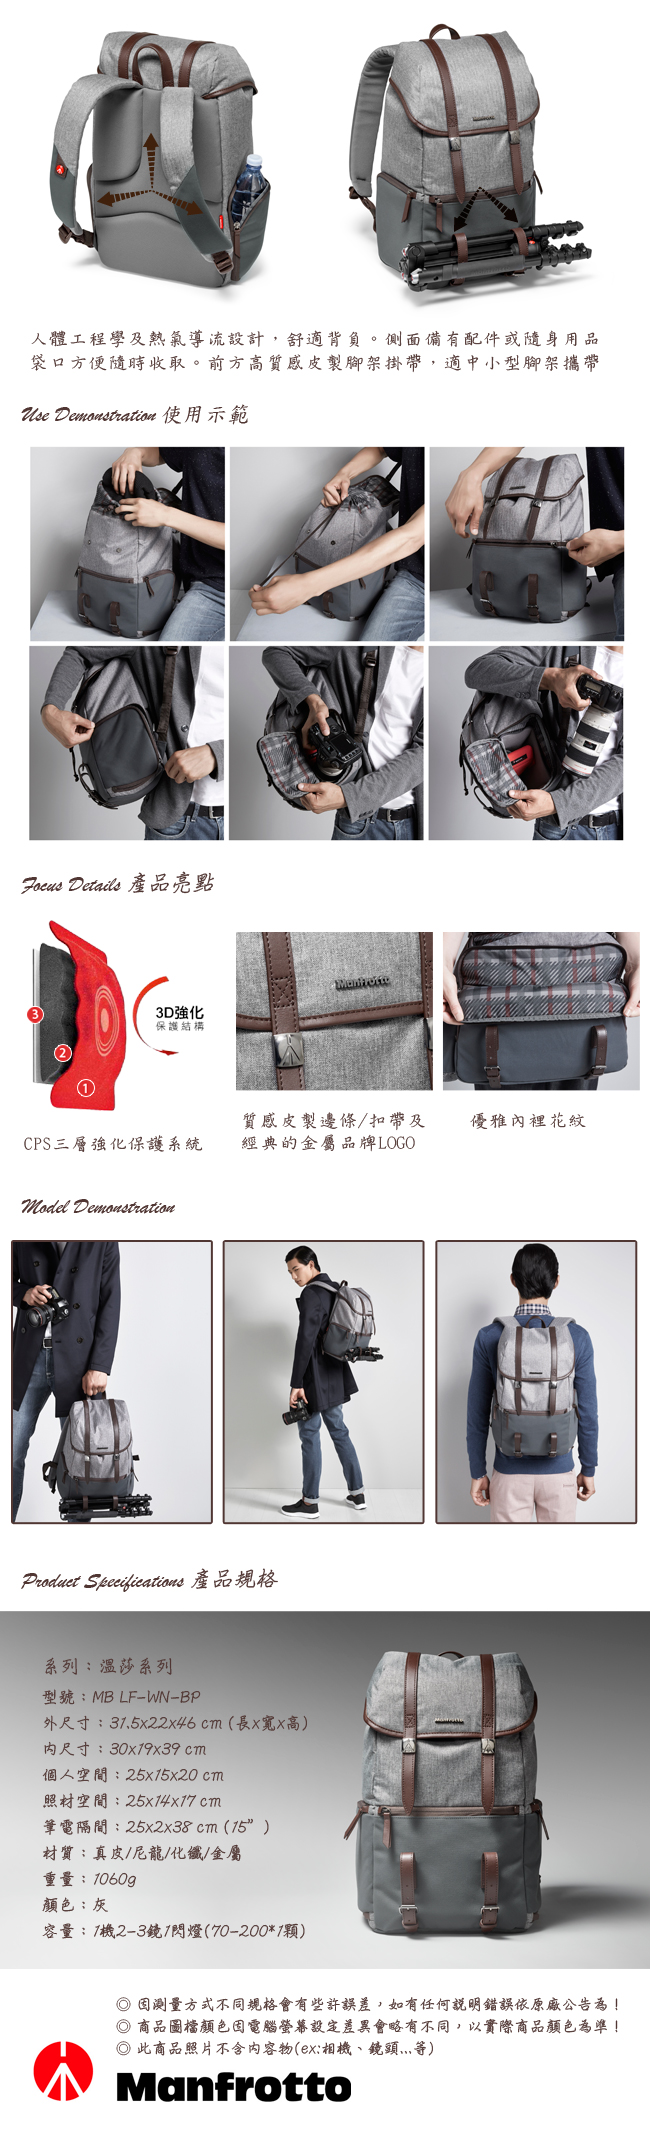 Manfrotto 溫莎系列後背包 Lifestyle Windsor Backpack